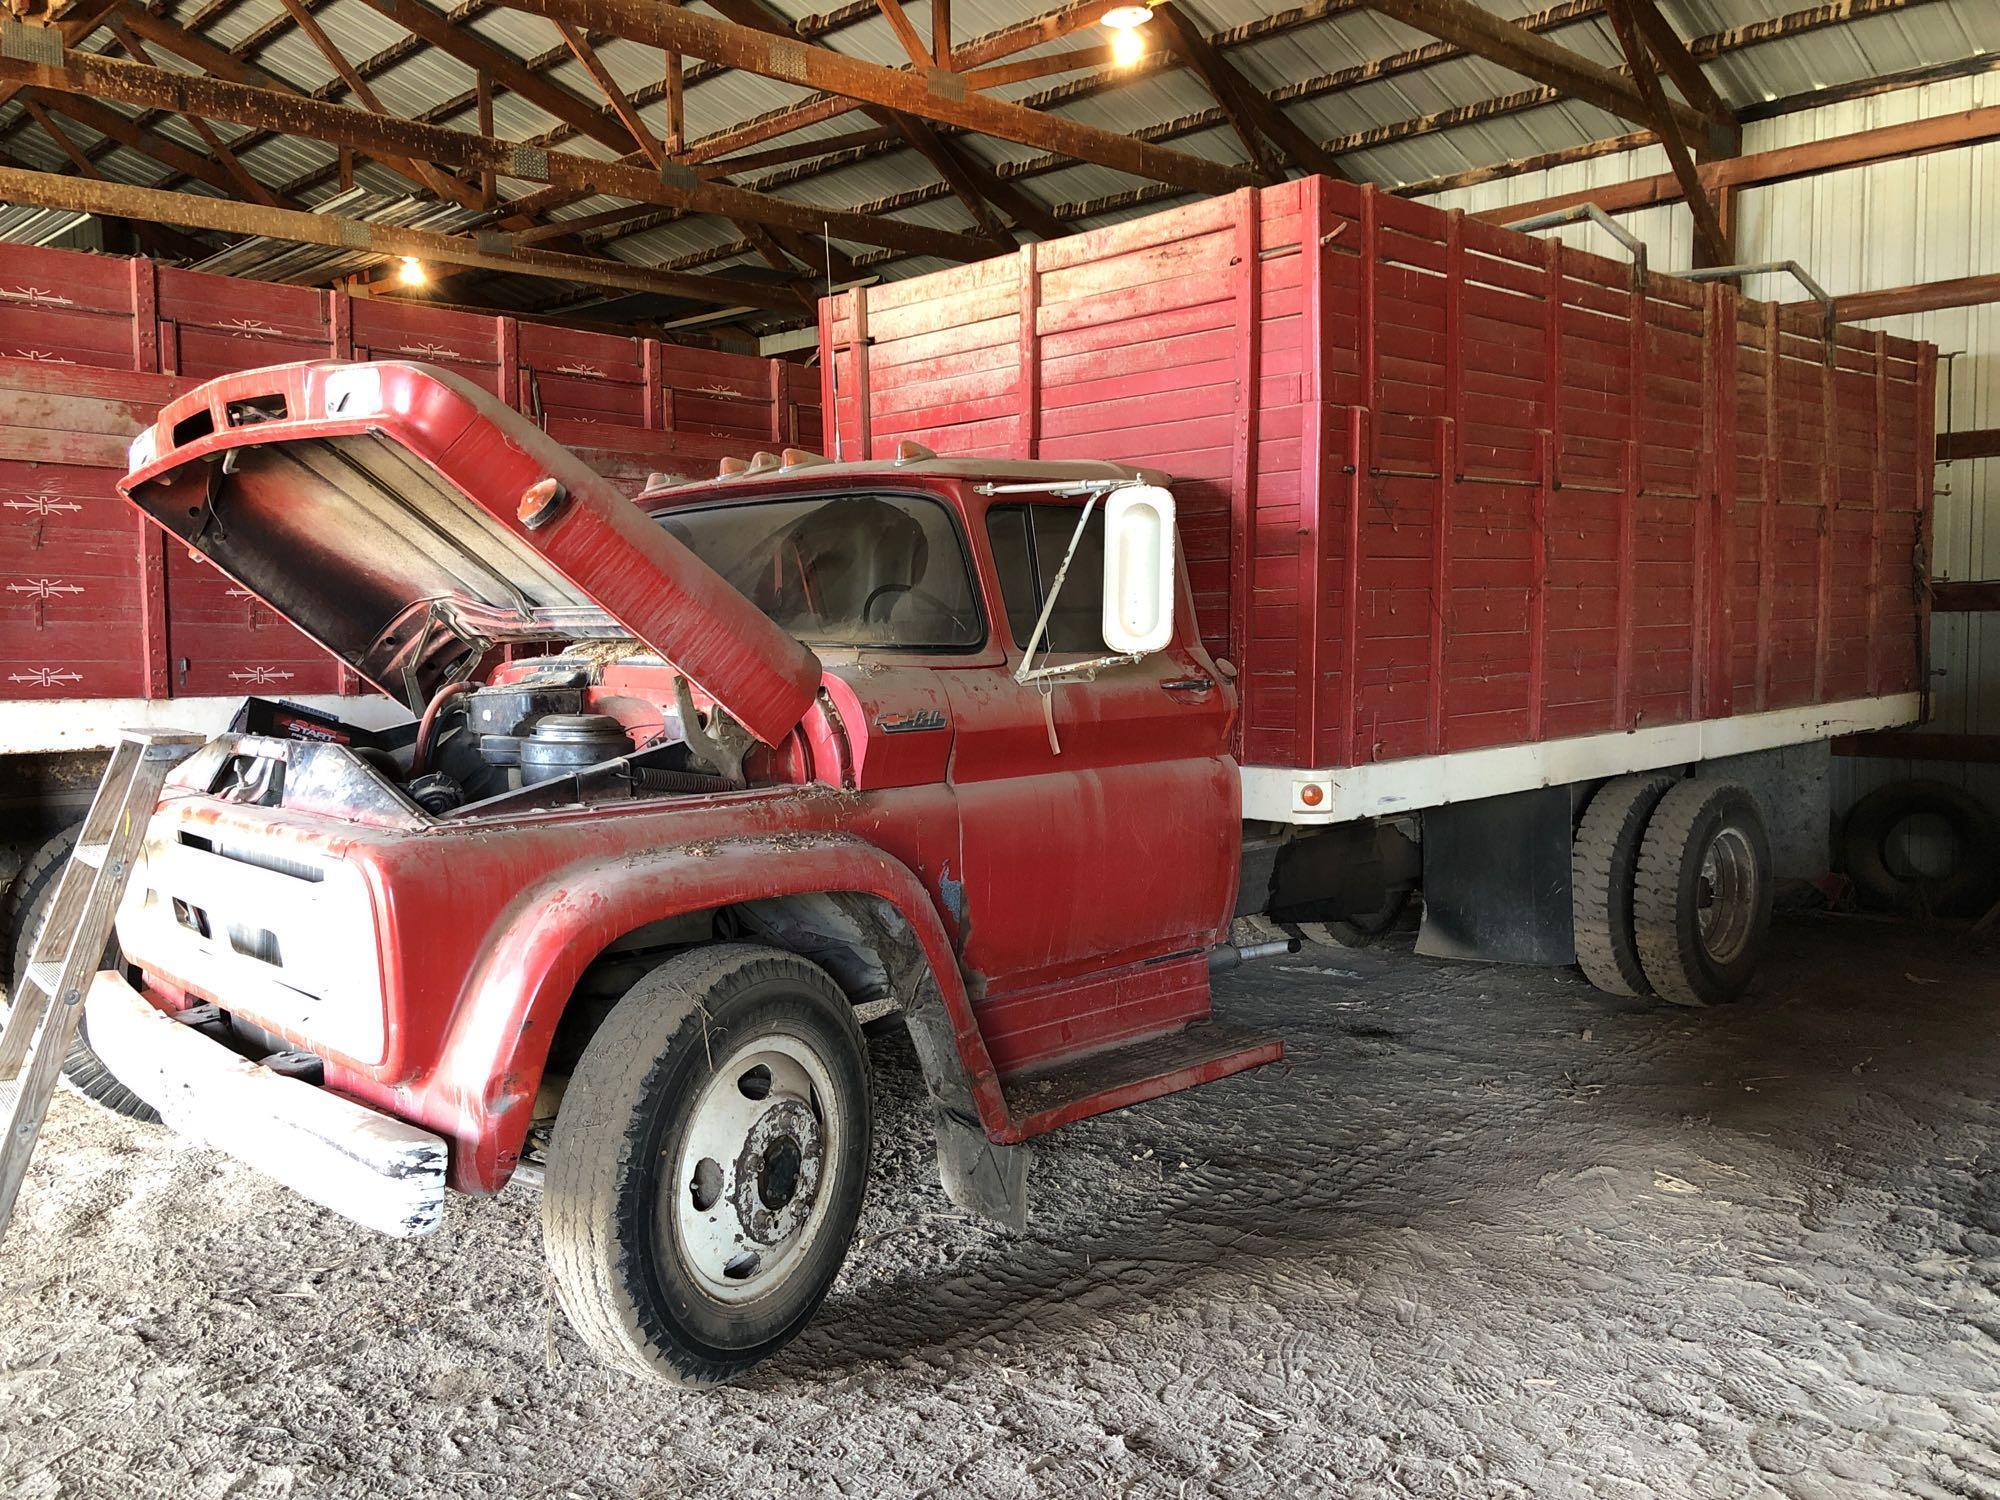 1962 Chevy 60 18' Stock Truck with Rack, Split Shift, 31,375 Miles, 19500lb G.W.